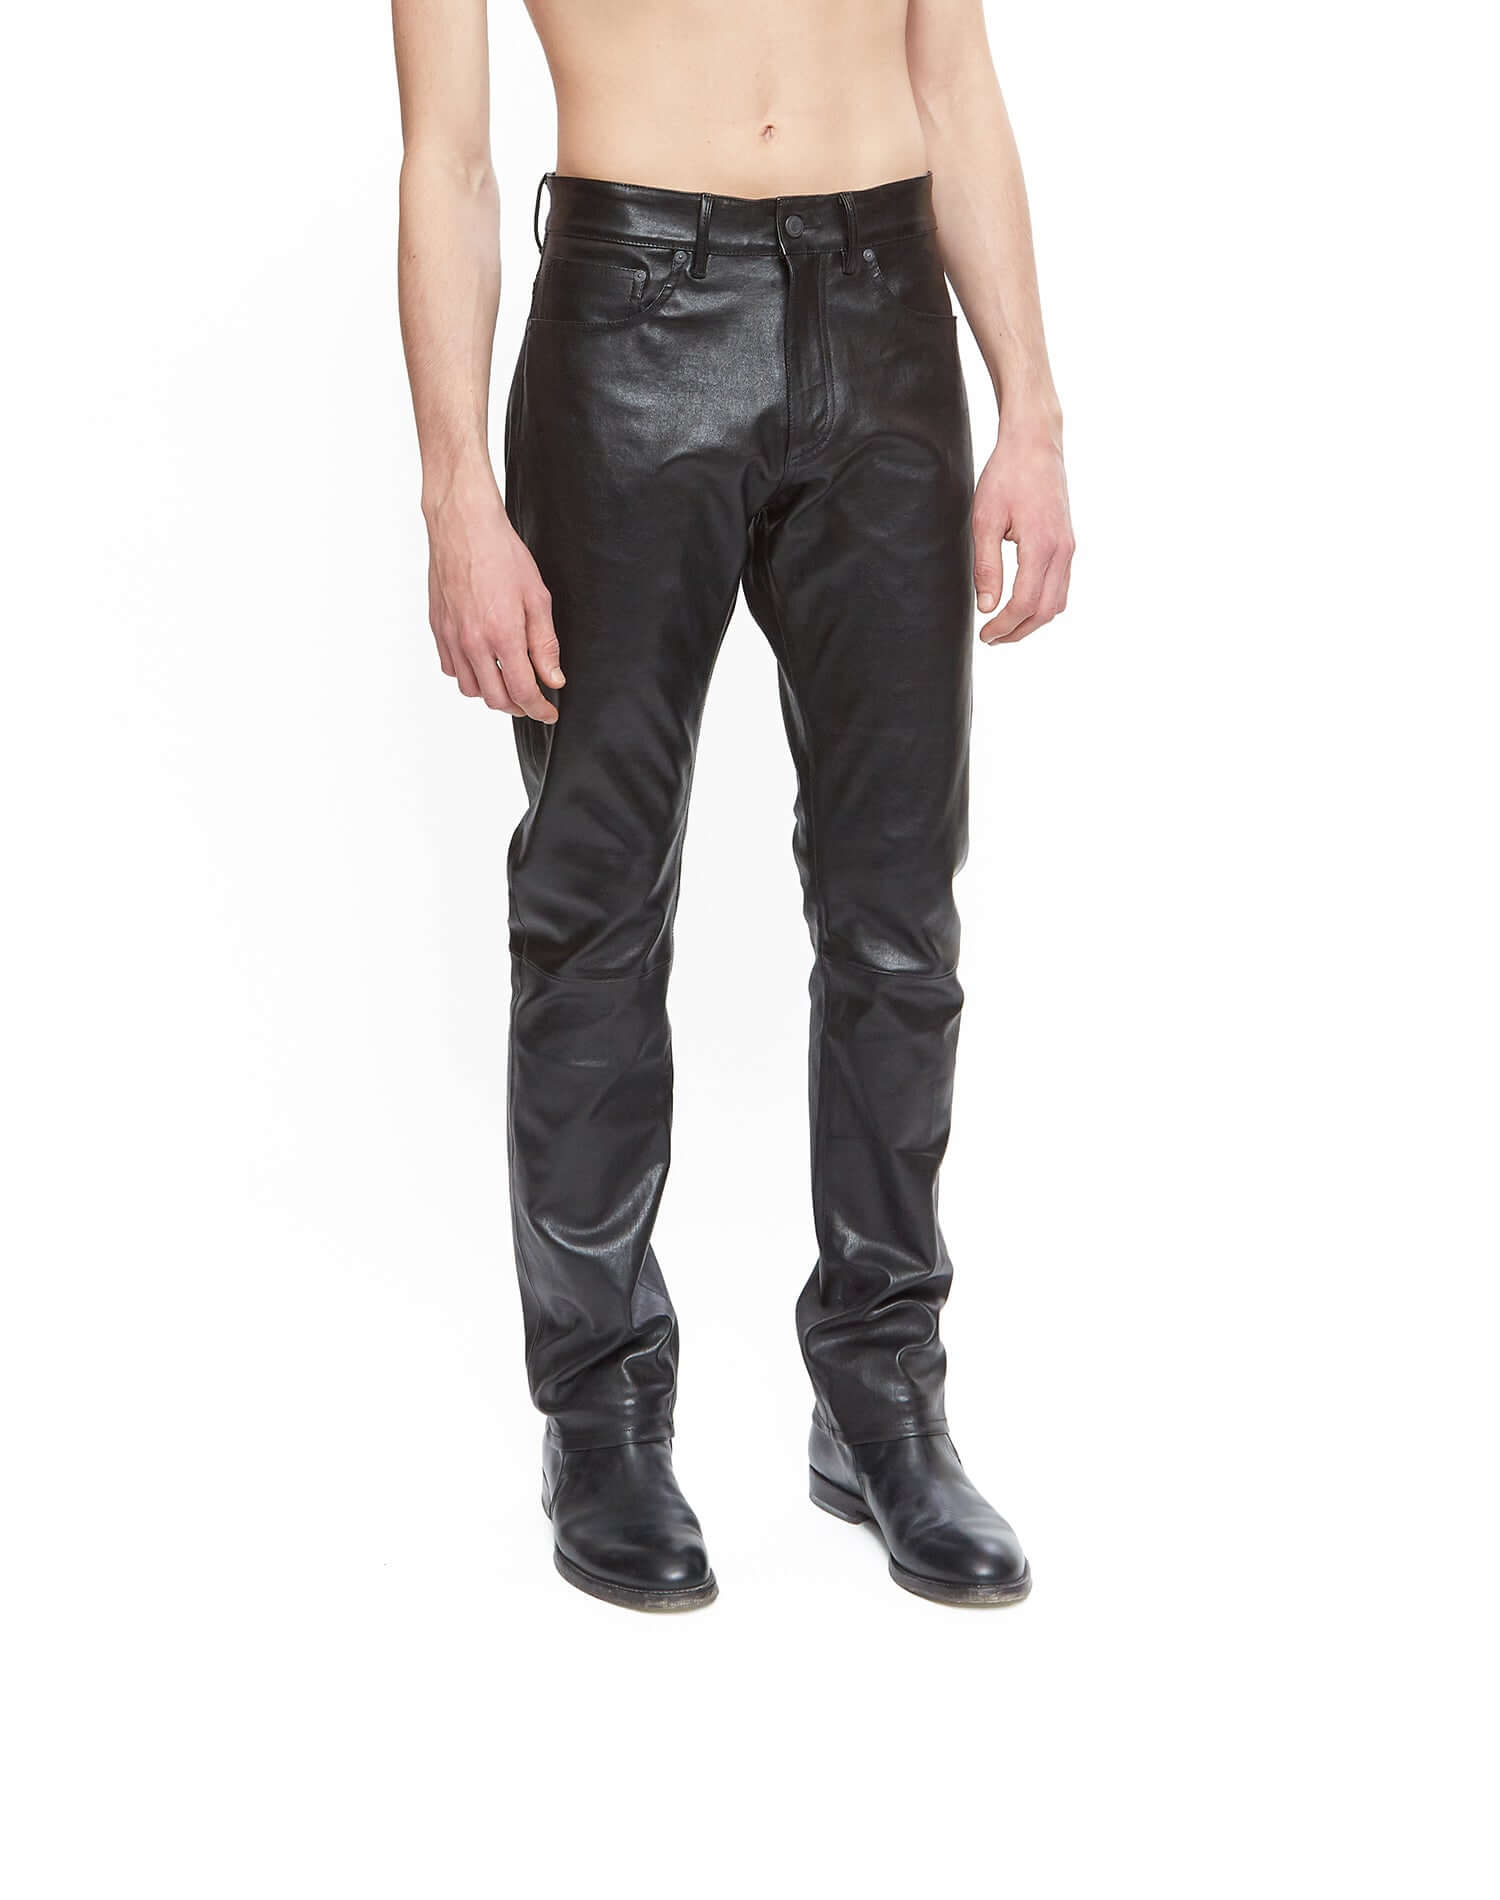 SEAN LEATHER PANTS Leather pants, skinny fit, hidden front zip closure. 100% leather. Made in Italy HTC LOS ANGELES